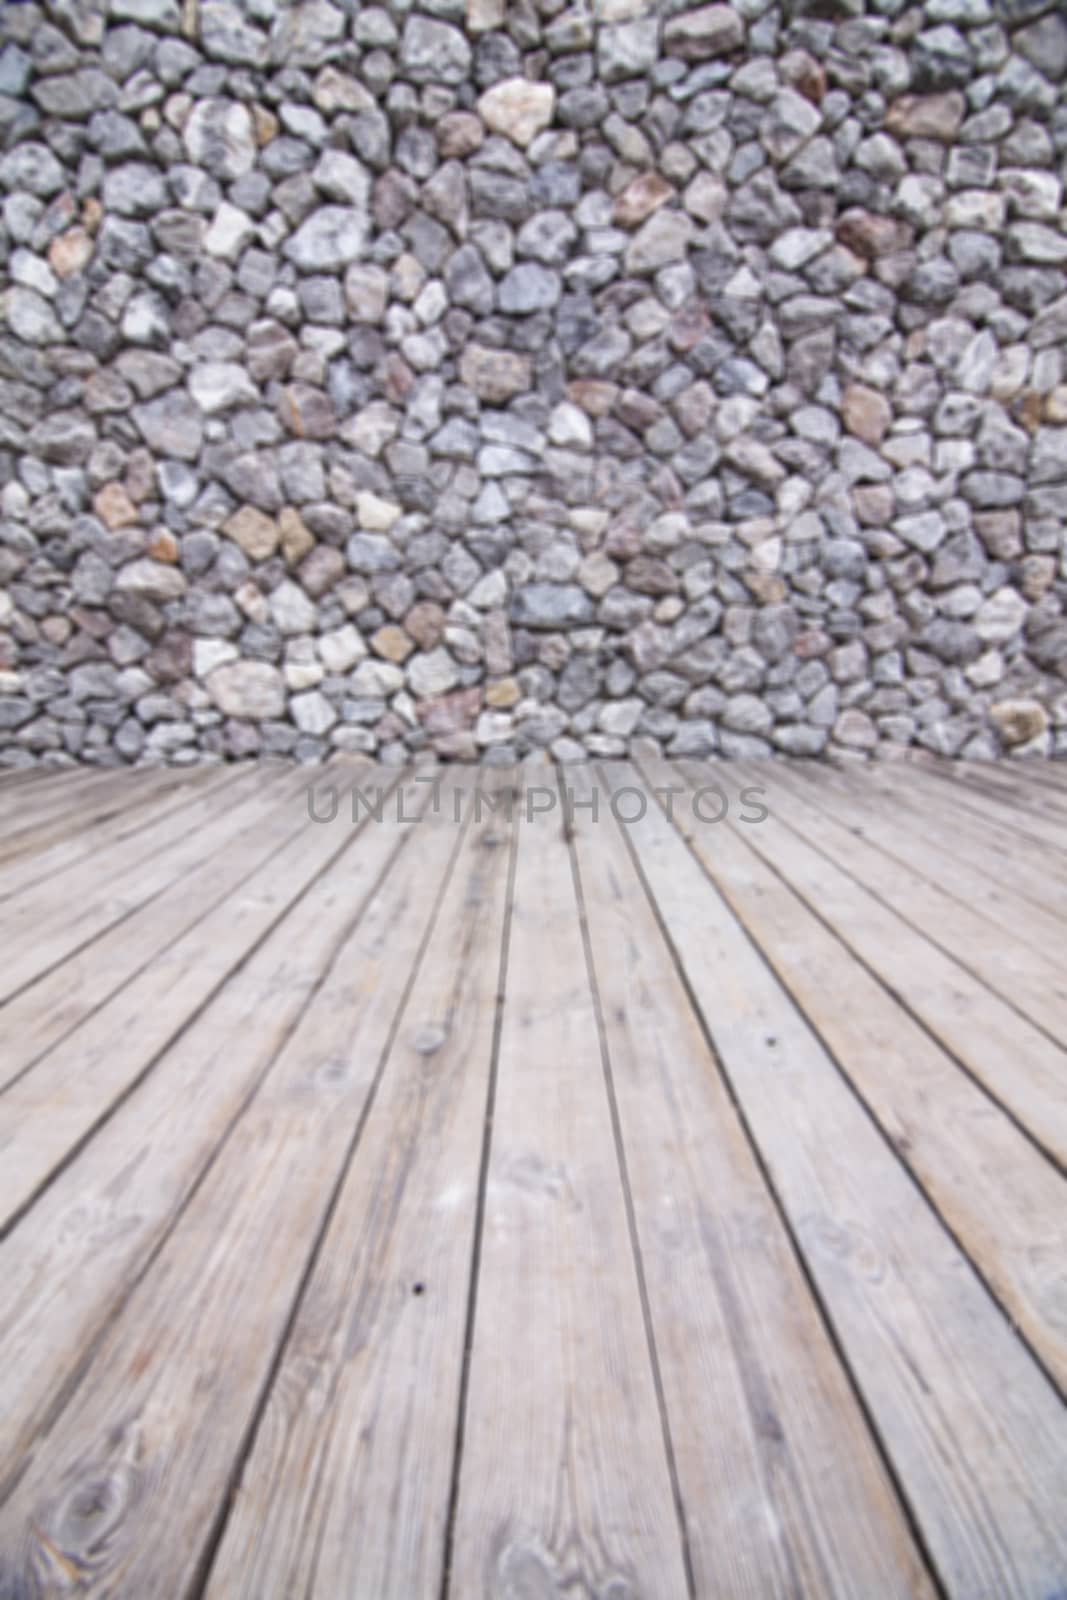 The rock walls and wooden floor. by jee1999